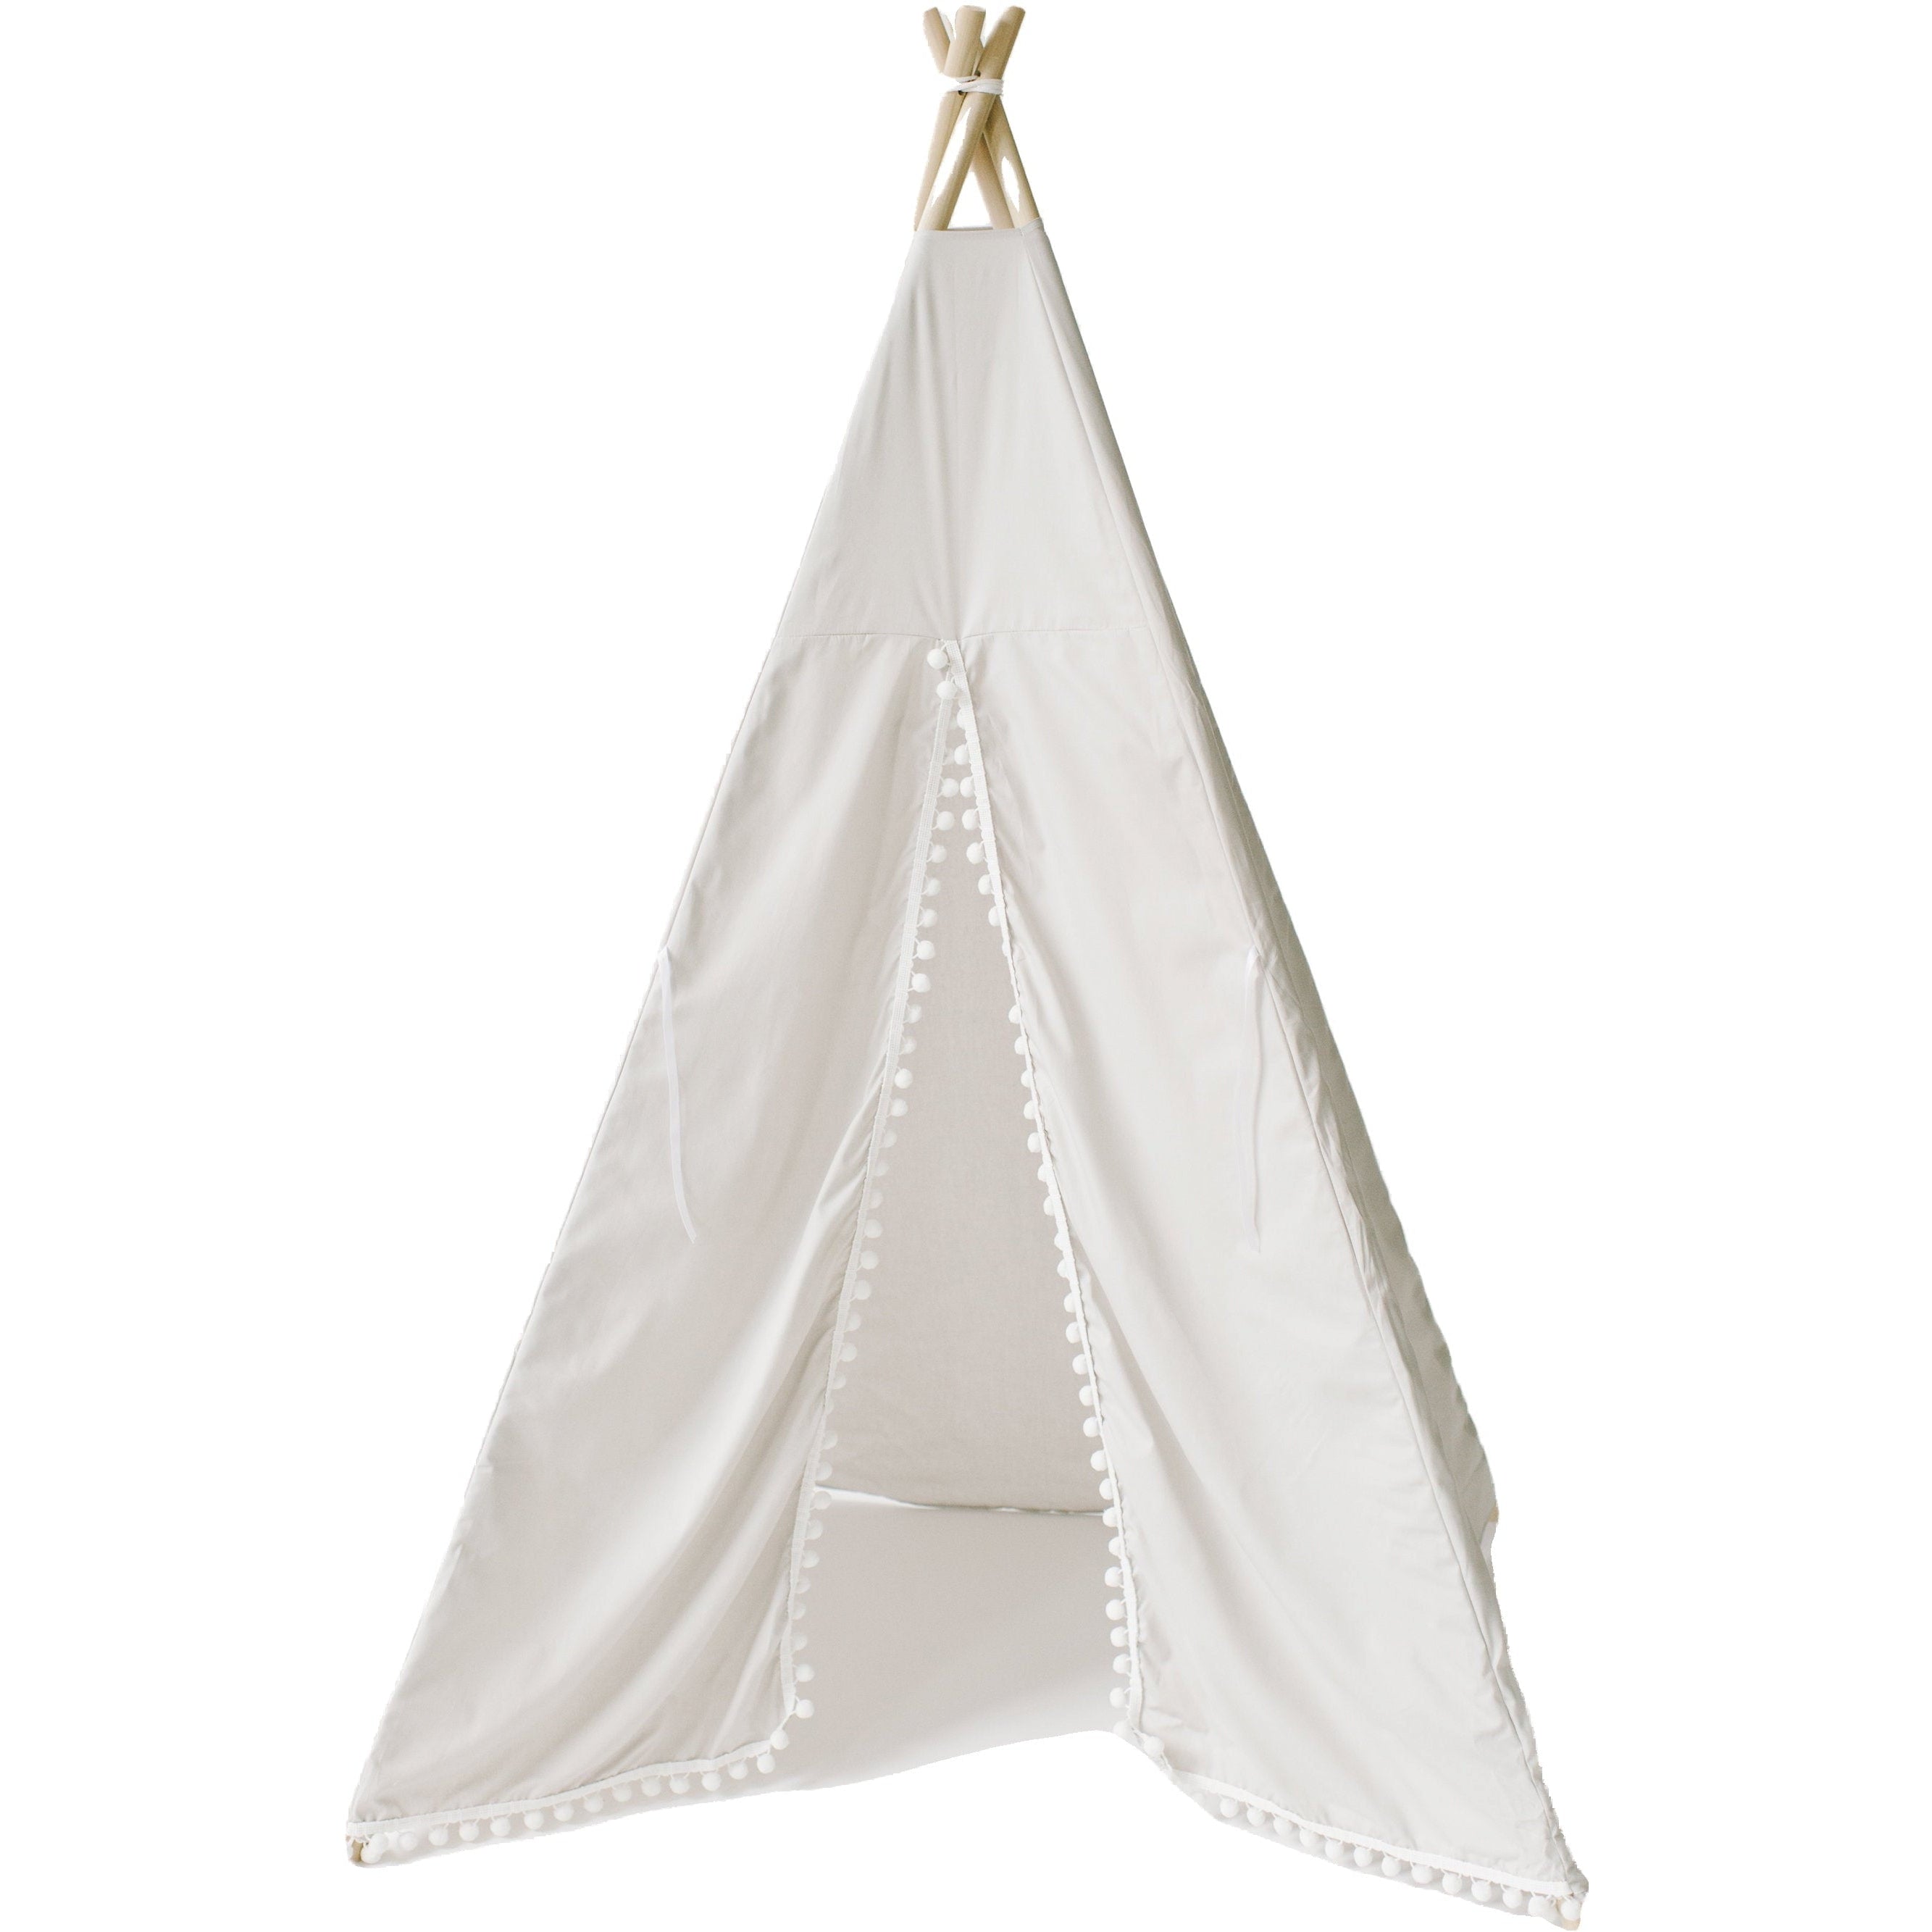 The Gray Play Tent